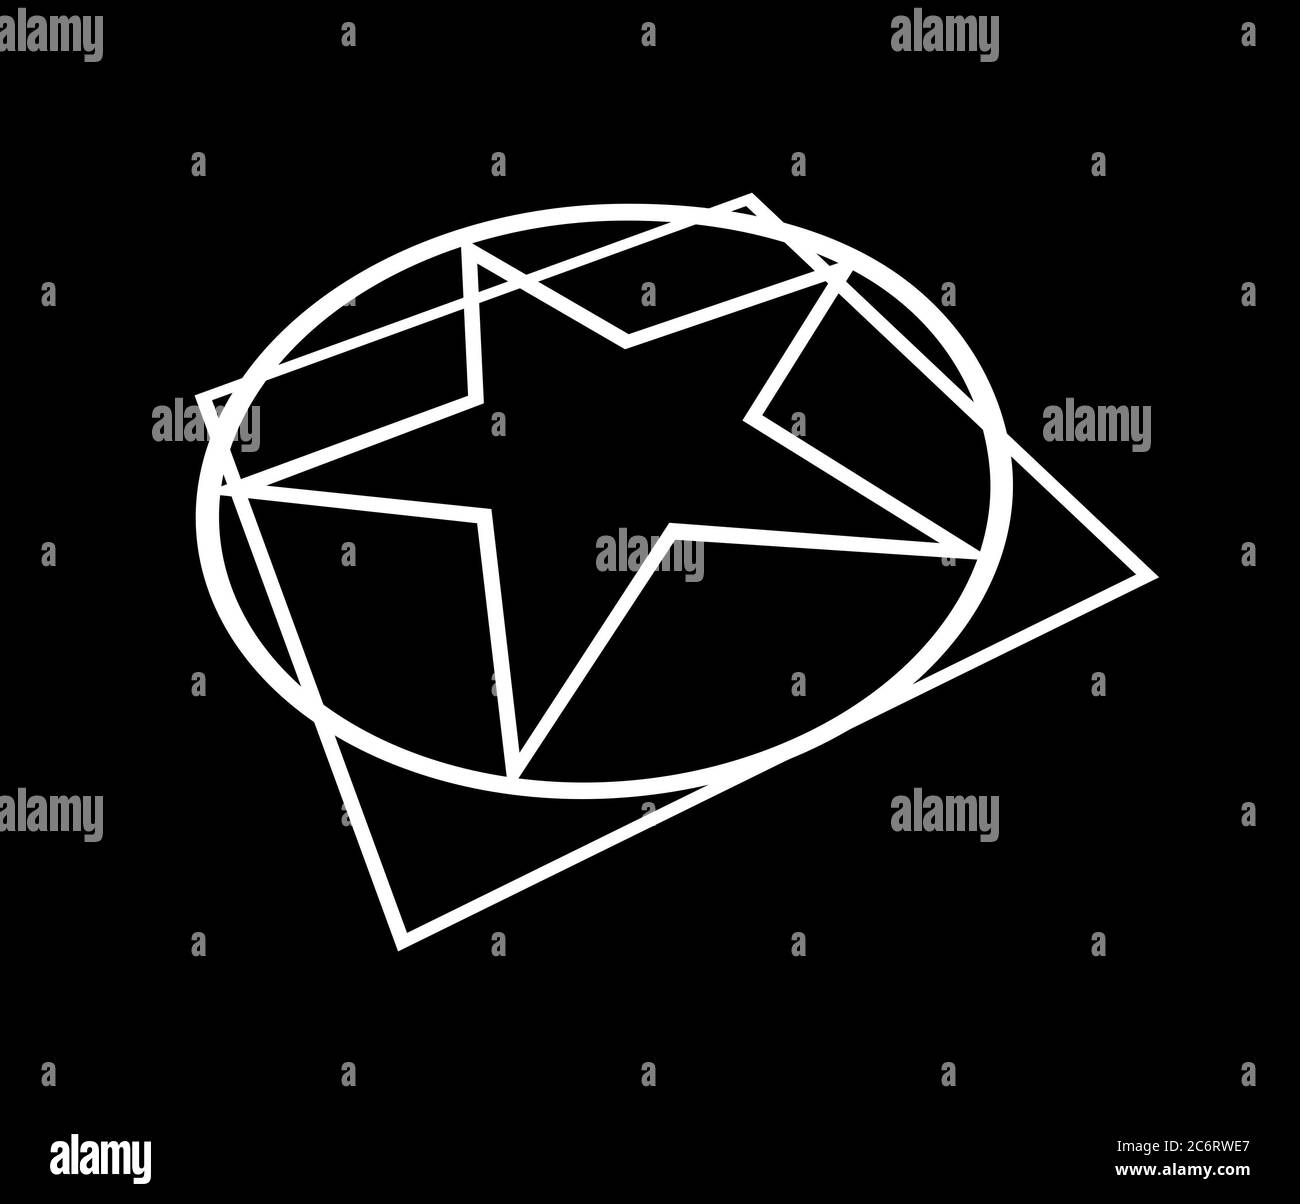 Five-pointed star linear style,circle,quad,overlap. Quality design element on black. Stock Photo